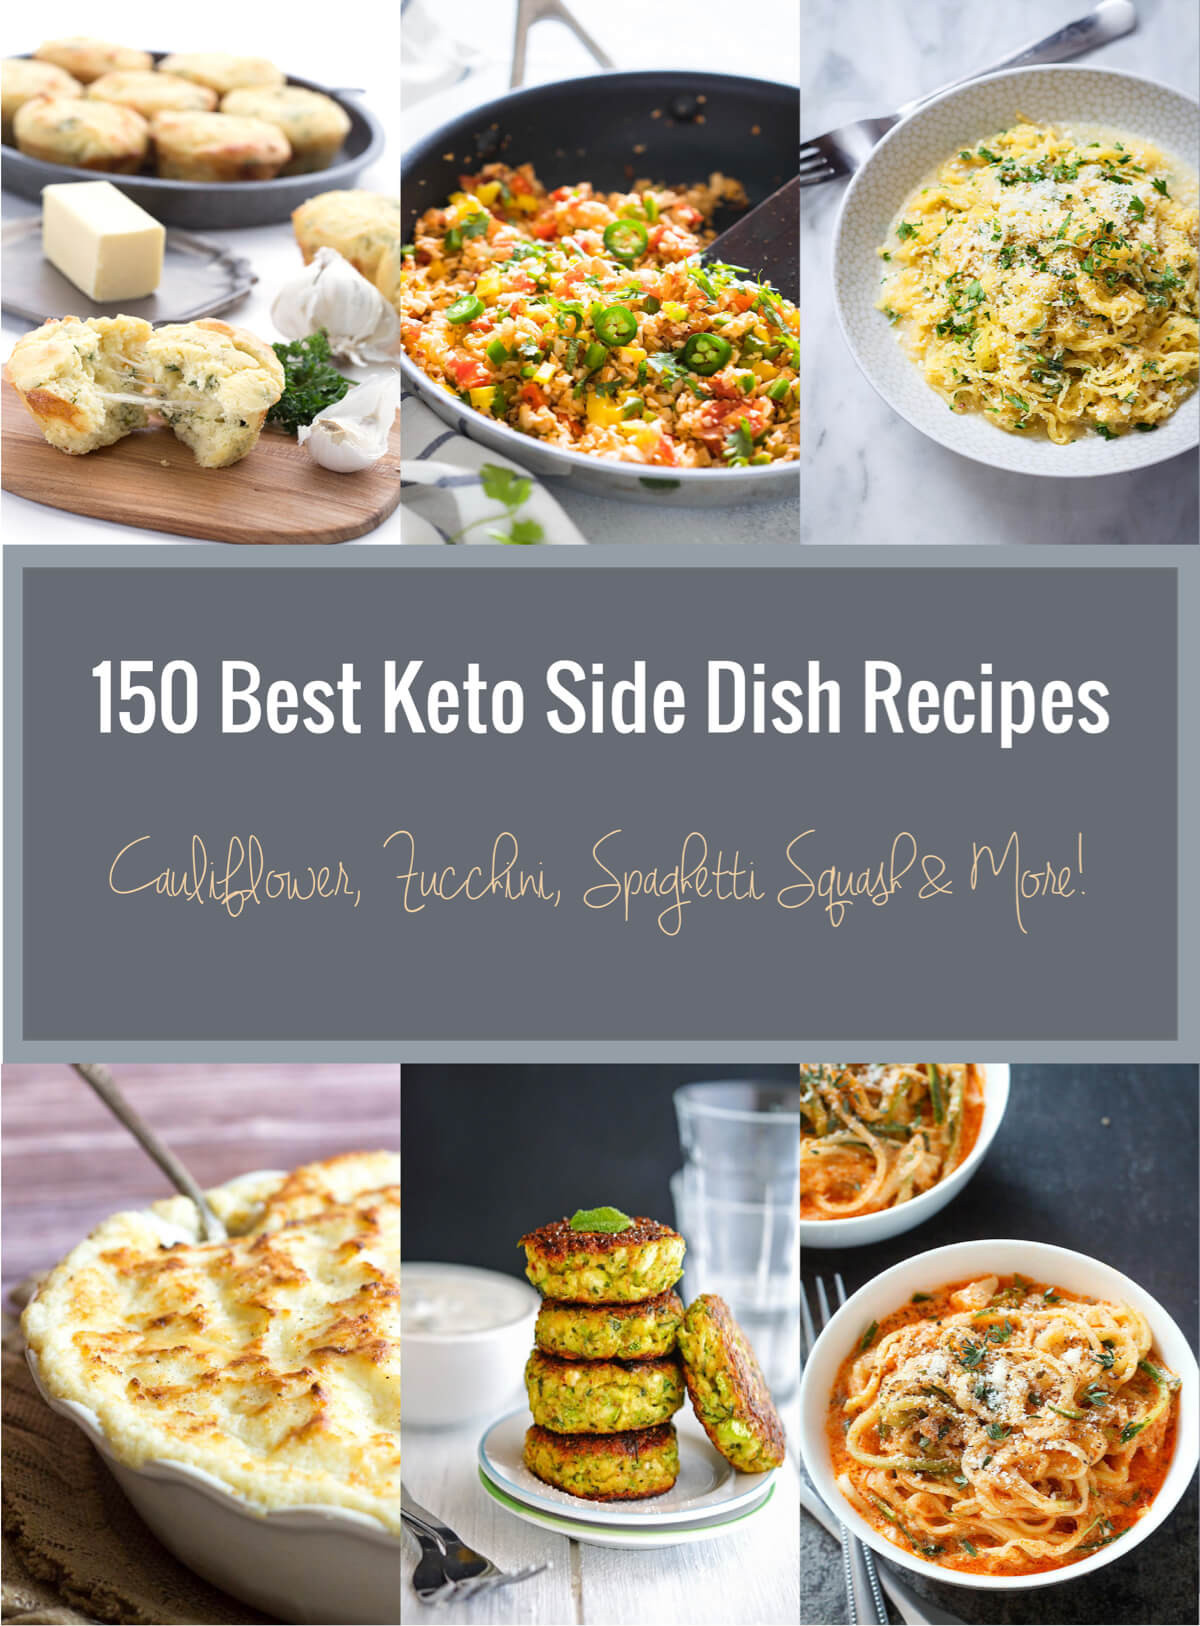 Easy Low Carb Side Dishes
 150 Best Keto Side Dish Recipes Low Carb